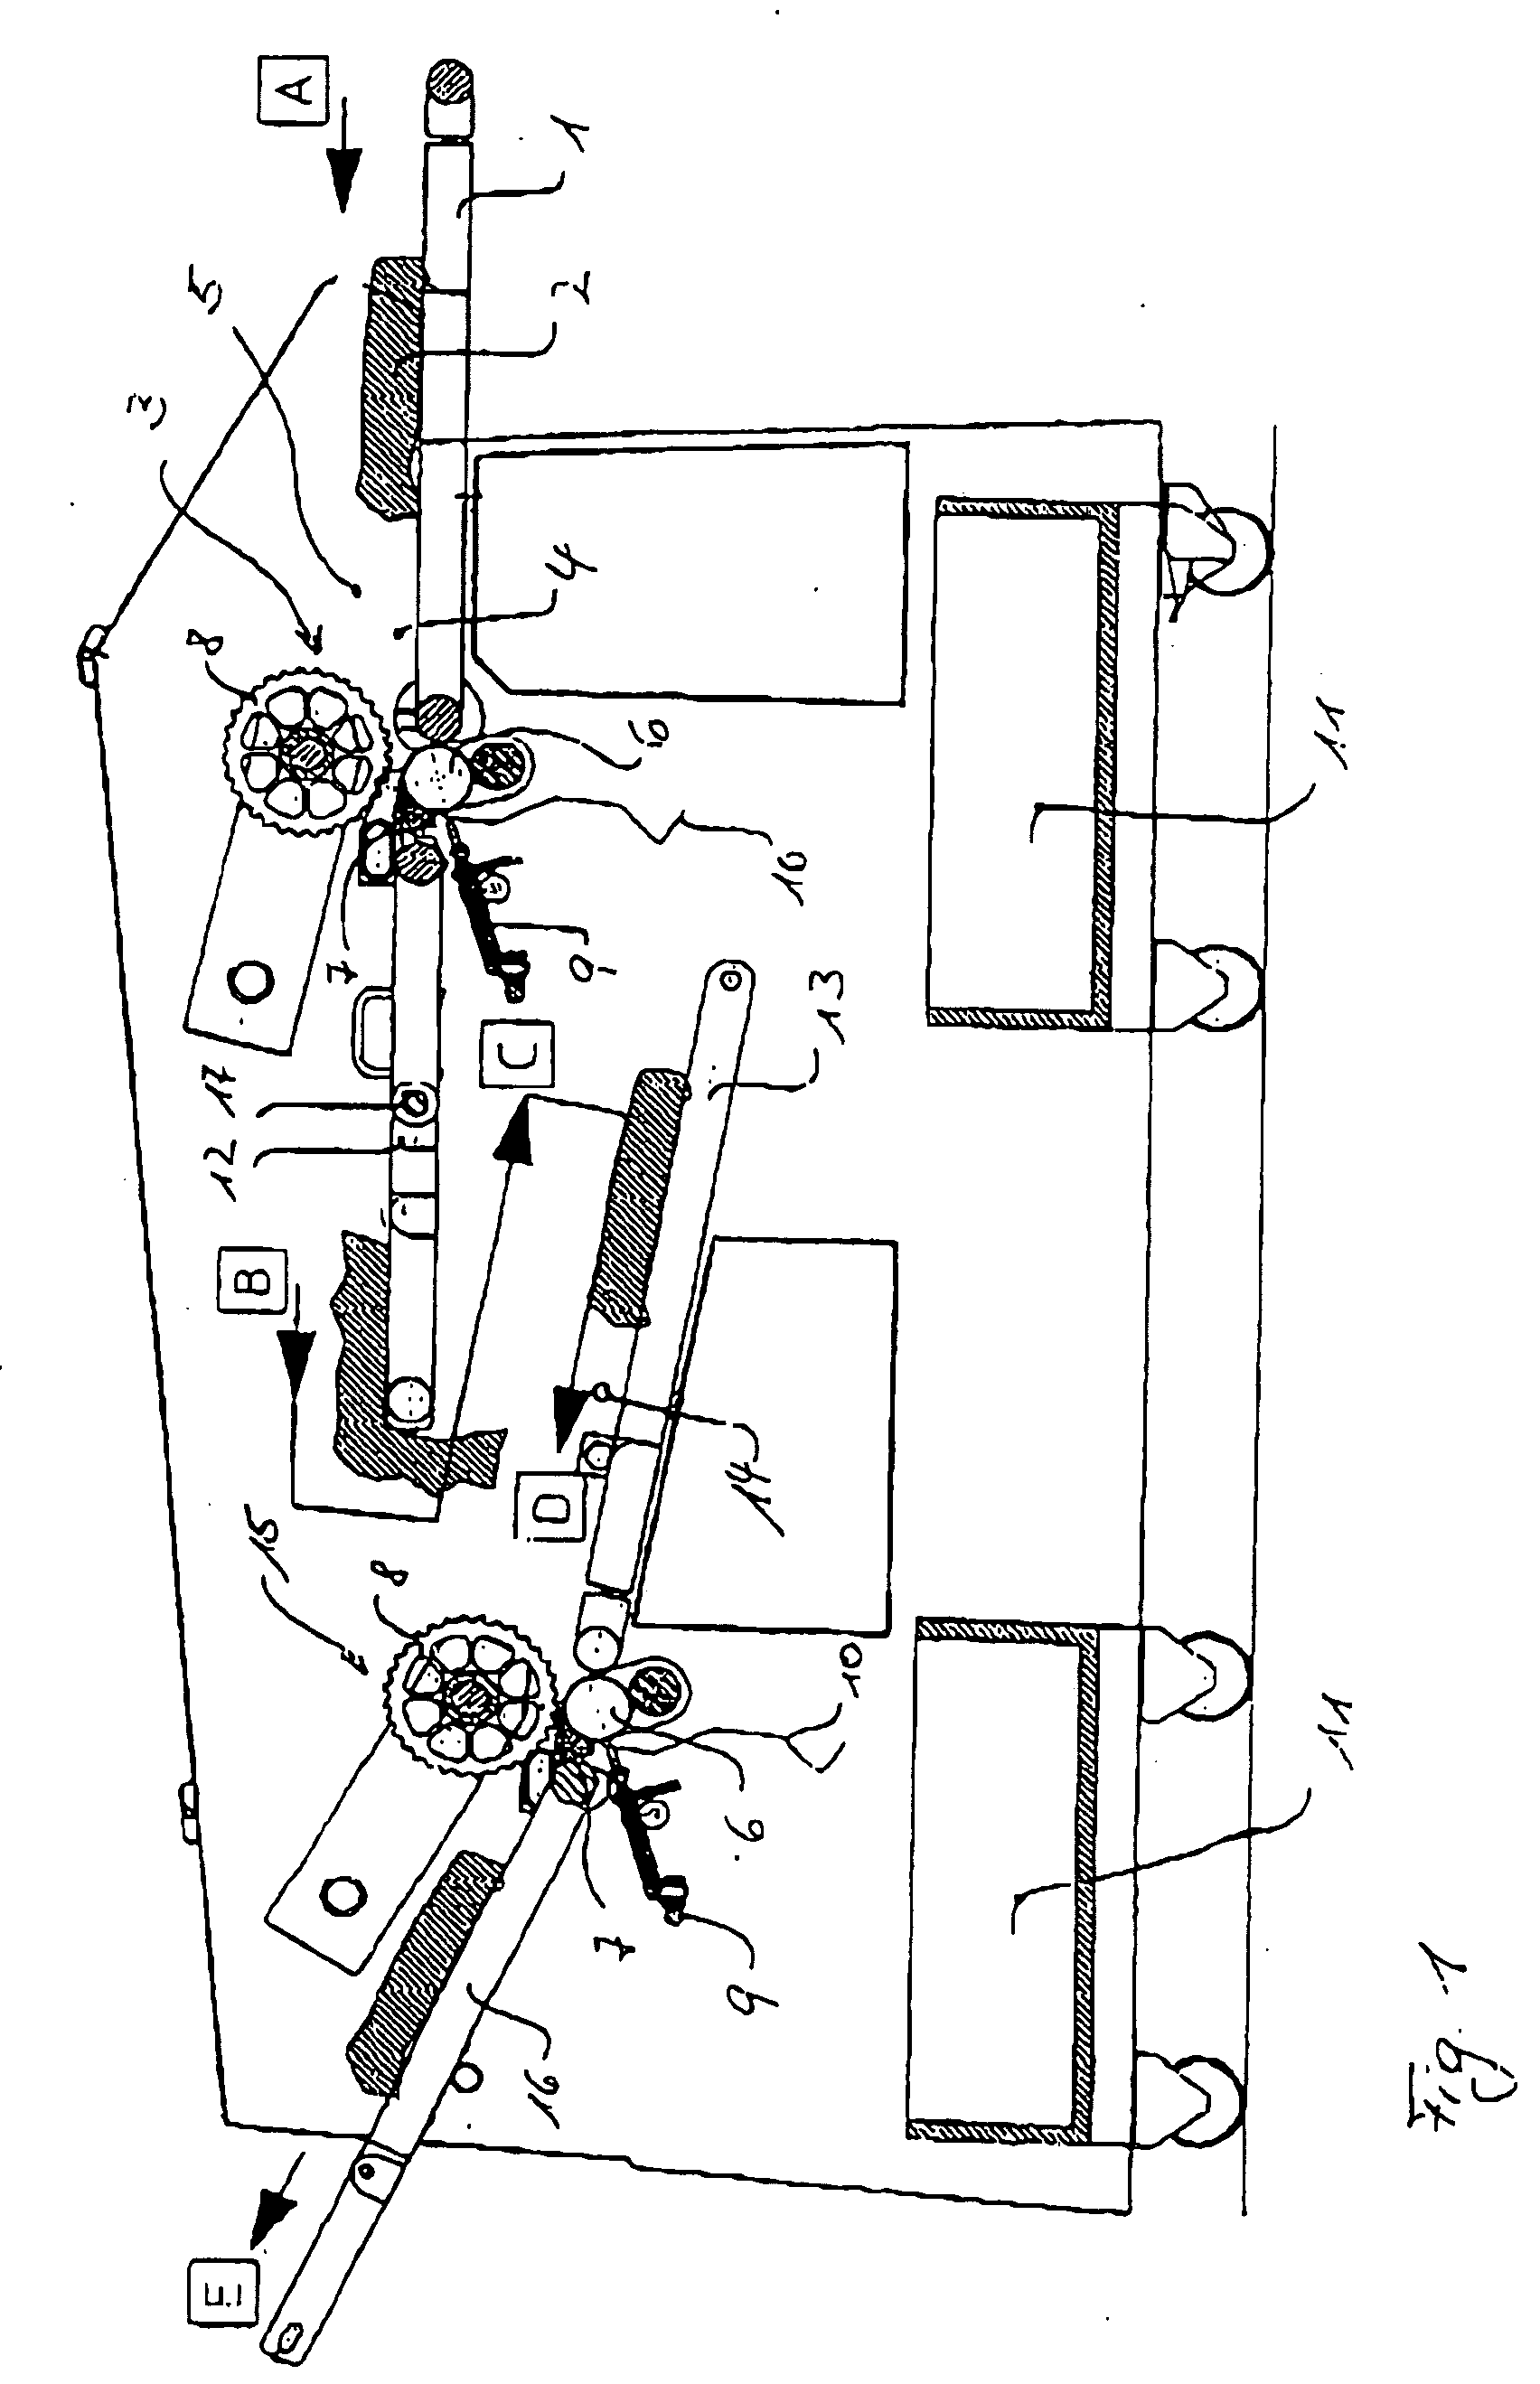 Device for de-rinding and skinning a product to be treated